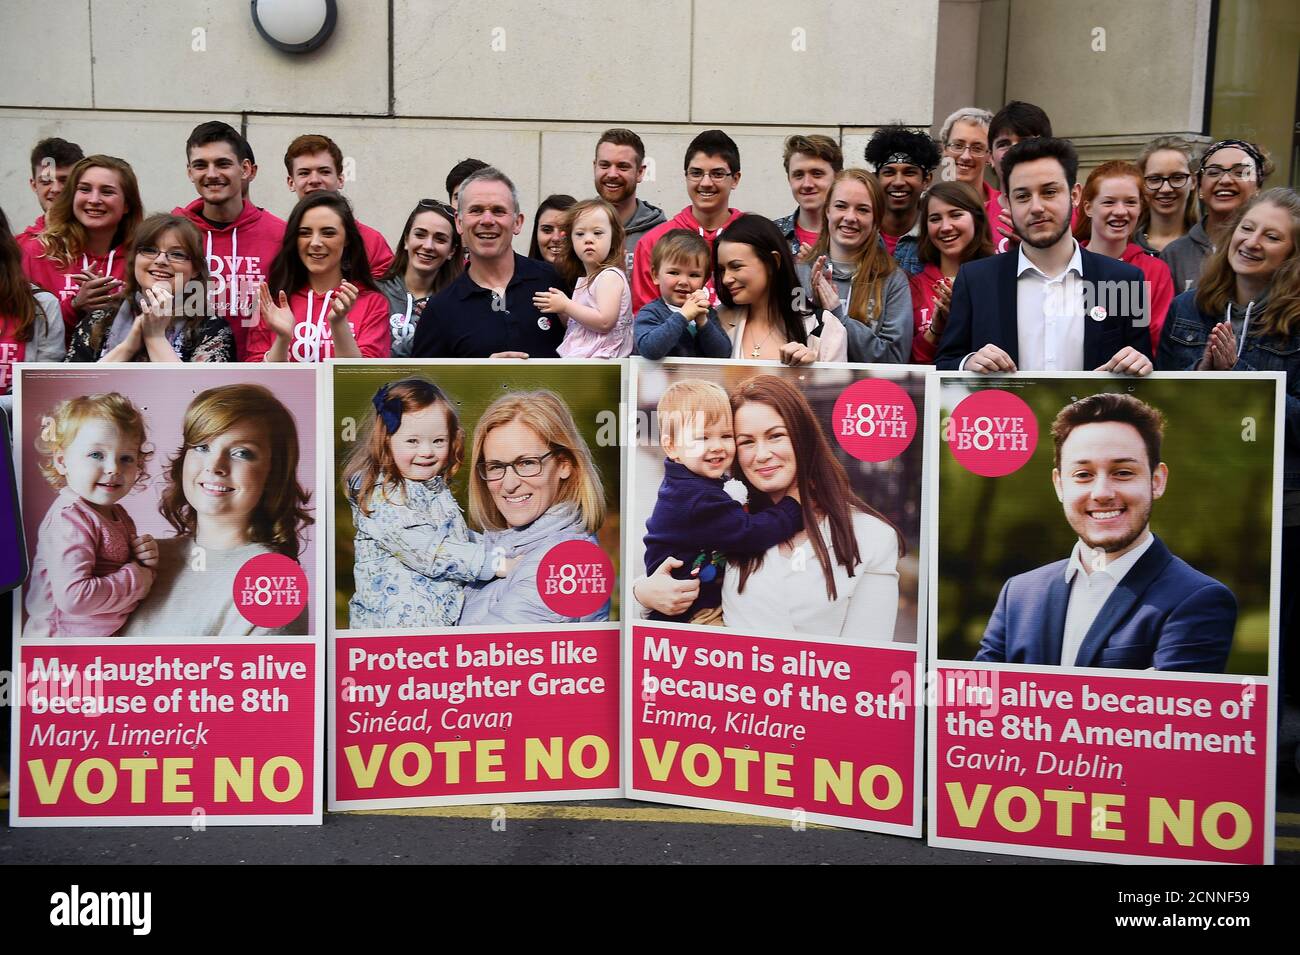 Parents and children who featured in the Pro-Life campaign crediting the 8th Amendment for saving the life of their unborn children are seen as part of a press event ahead of a 25th May referendum on abortion law, in Dublin, Ireland, May 23, 2018. REUTERS/Clodagh Kilcoyne Stock Photo